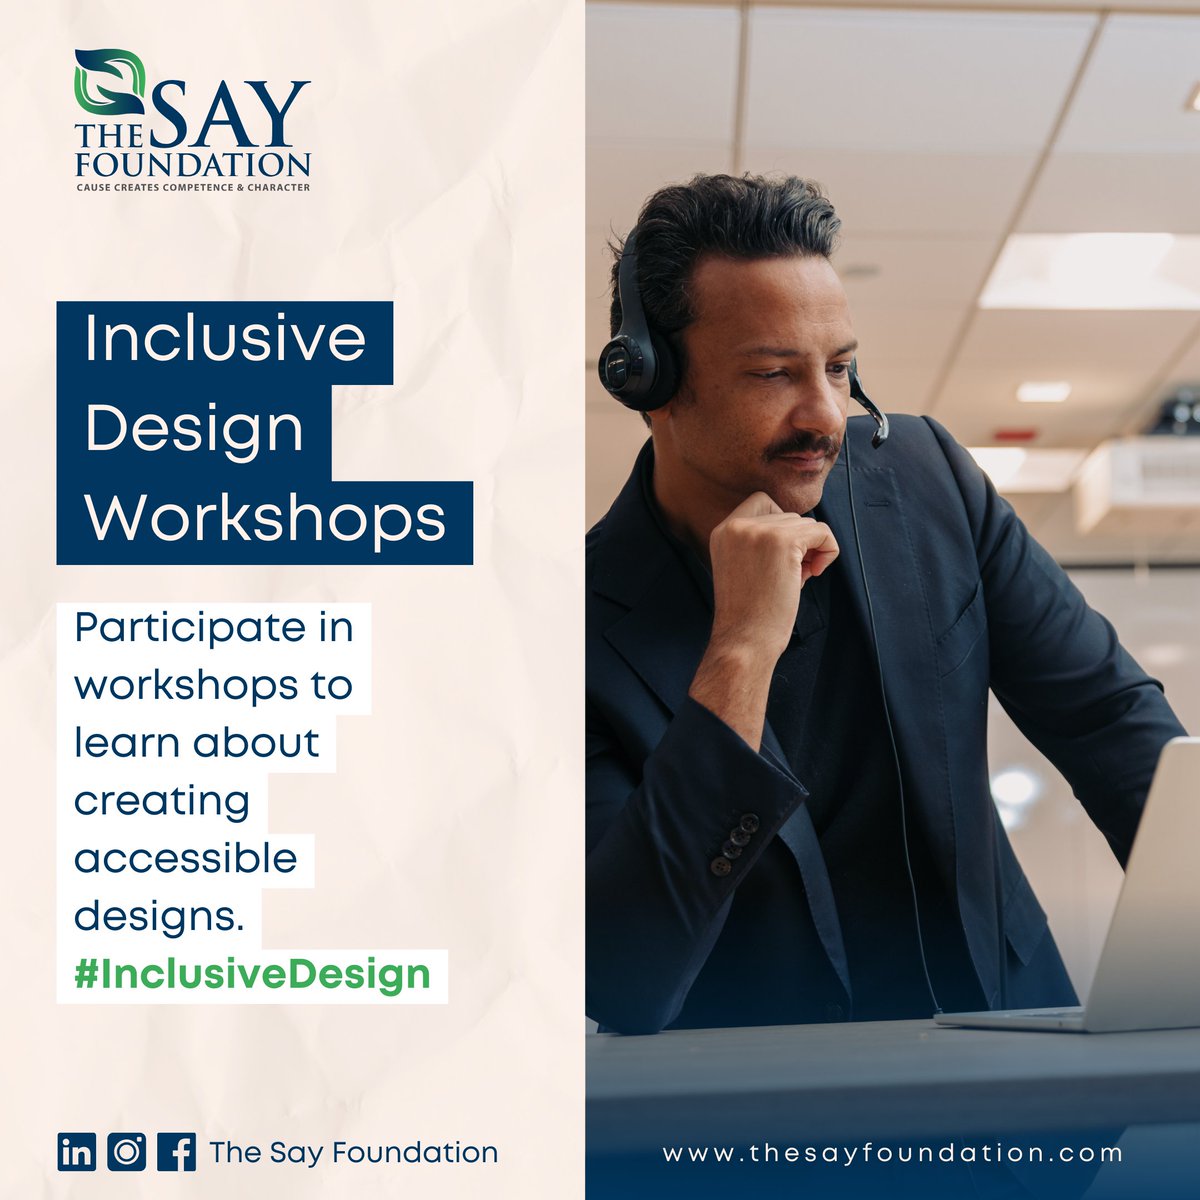 Design with a Purpose

Unleash the power of inclusivity in design with The Say Foundation's workshops. 

Be a design changemaker—Sign Up for our workshops today!

#inclusivedesign #designforall #accessibledesign #createchange #workshops #job #candidates #PWD #handicap